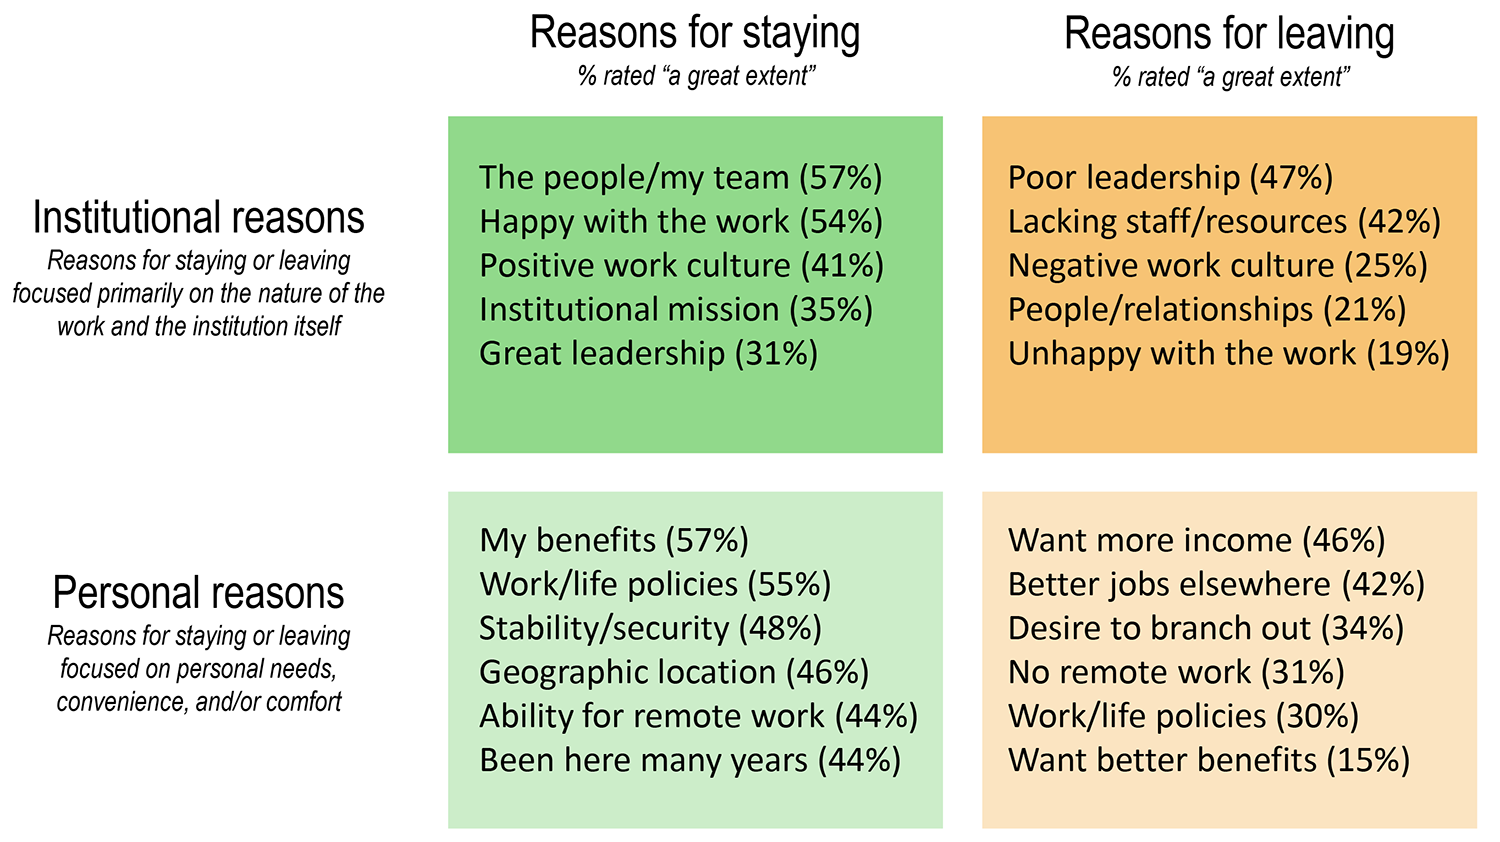 Reasons for staying (% rated 'a great extent'): Institutional reasons | Reasons for staying or leaving focused primarily on the nature of the work and the institution itself: The people/my team (57%) Happy with the work (54%) Positive work culture (41%) Institutional mission (35%) Great leadership (31%). Personal reasons | Reasons for staying or leaving focused on personal needs, convenience, and/or comfort: My benefits (57%) Work/life policies (55%) Stability/security (48%) Geographic location (46%) Ability for remote work (44%) Been here many years (44%).    Reasons for leaving (% rated 'a great extent'): Institutional reasons | Reasons for staying or leaving focused primarily on the nature of the work and the institution itself: Poor leadership (47%) Lacking staff/resources (42%) Negative work culture (25%) People/relationships (21%) Unhappy with the work (19%).  Personal reasons | Reasons for staying or leaving focused on personal needs, convenience, and/or comfort: Want more income (46%) Better jobs elsewhere (42%) Desire to branch out (34%) No remote work (31%) Work/life policies (30%) Want better benefits (15%).